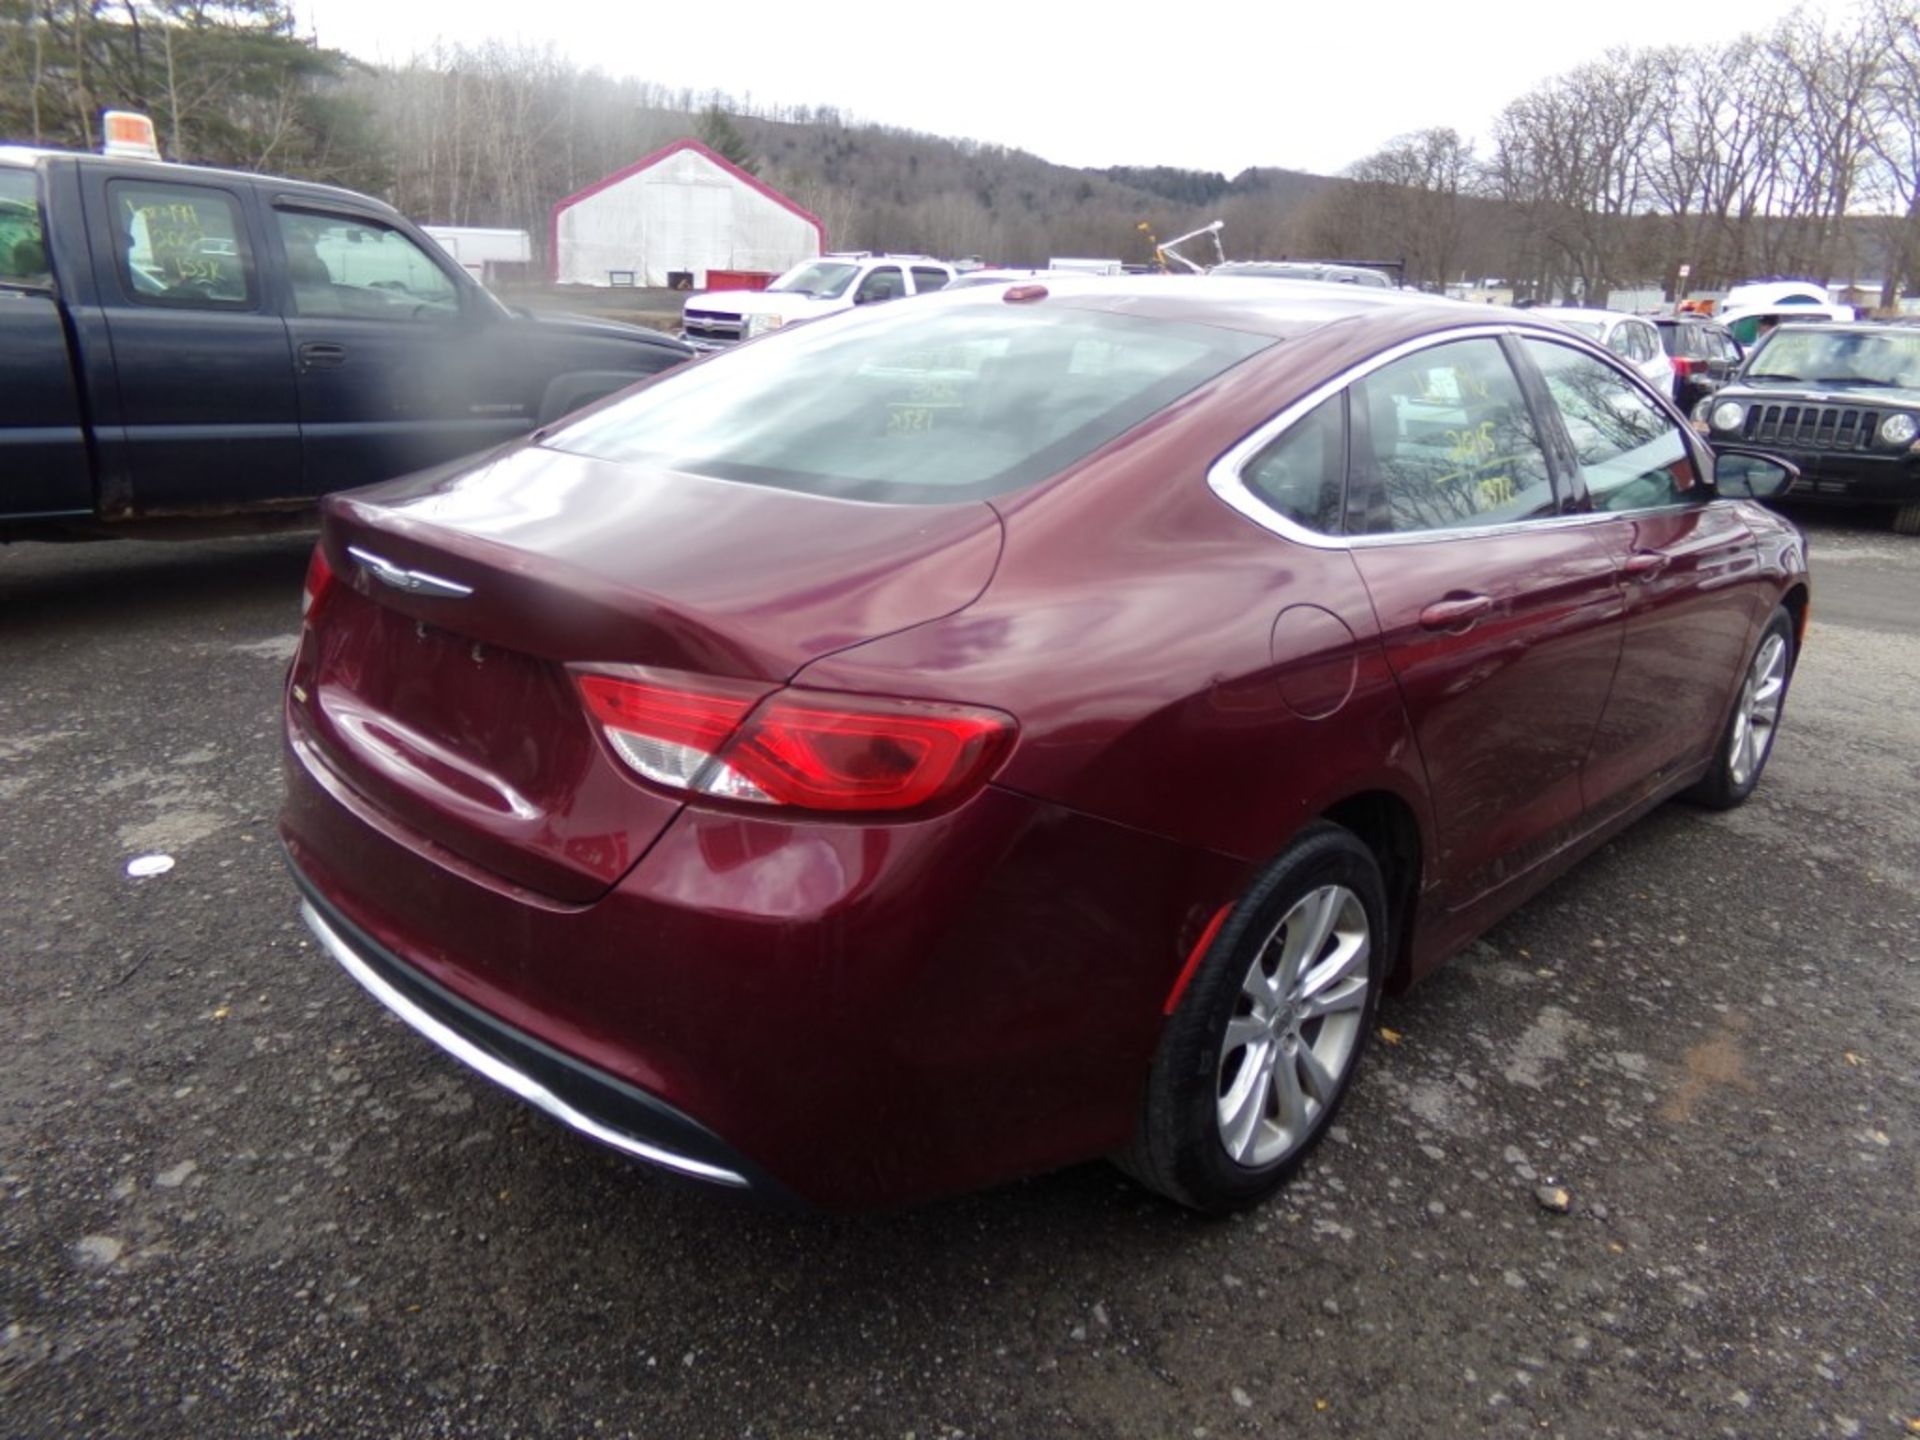 2015 Chrysler 200 Limited, Maroon, 137,543 Miles, VIN# 1C3CCCAB0FN591551, FRONT BUMPER COVER HAS - Image 3 of 8